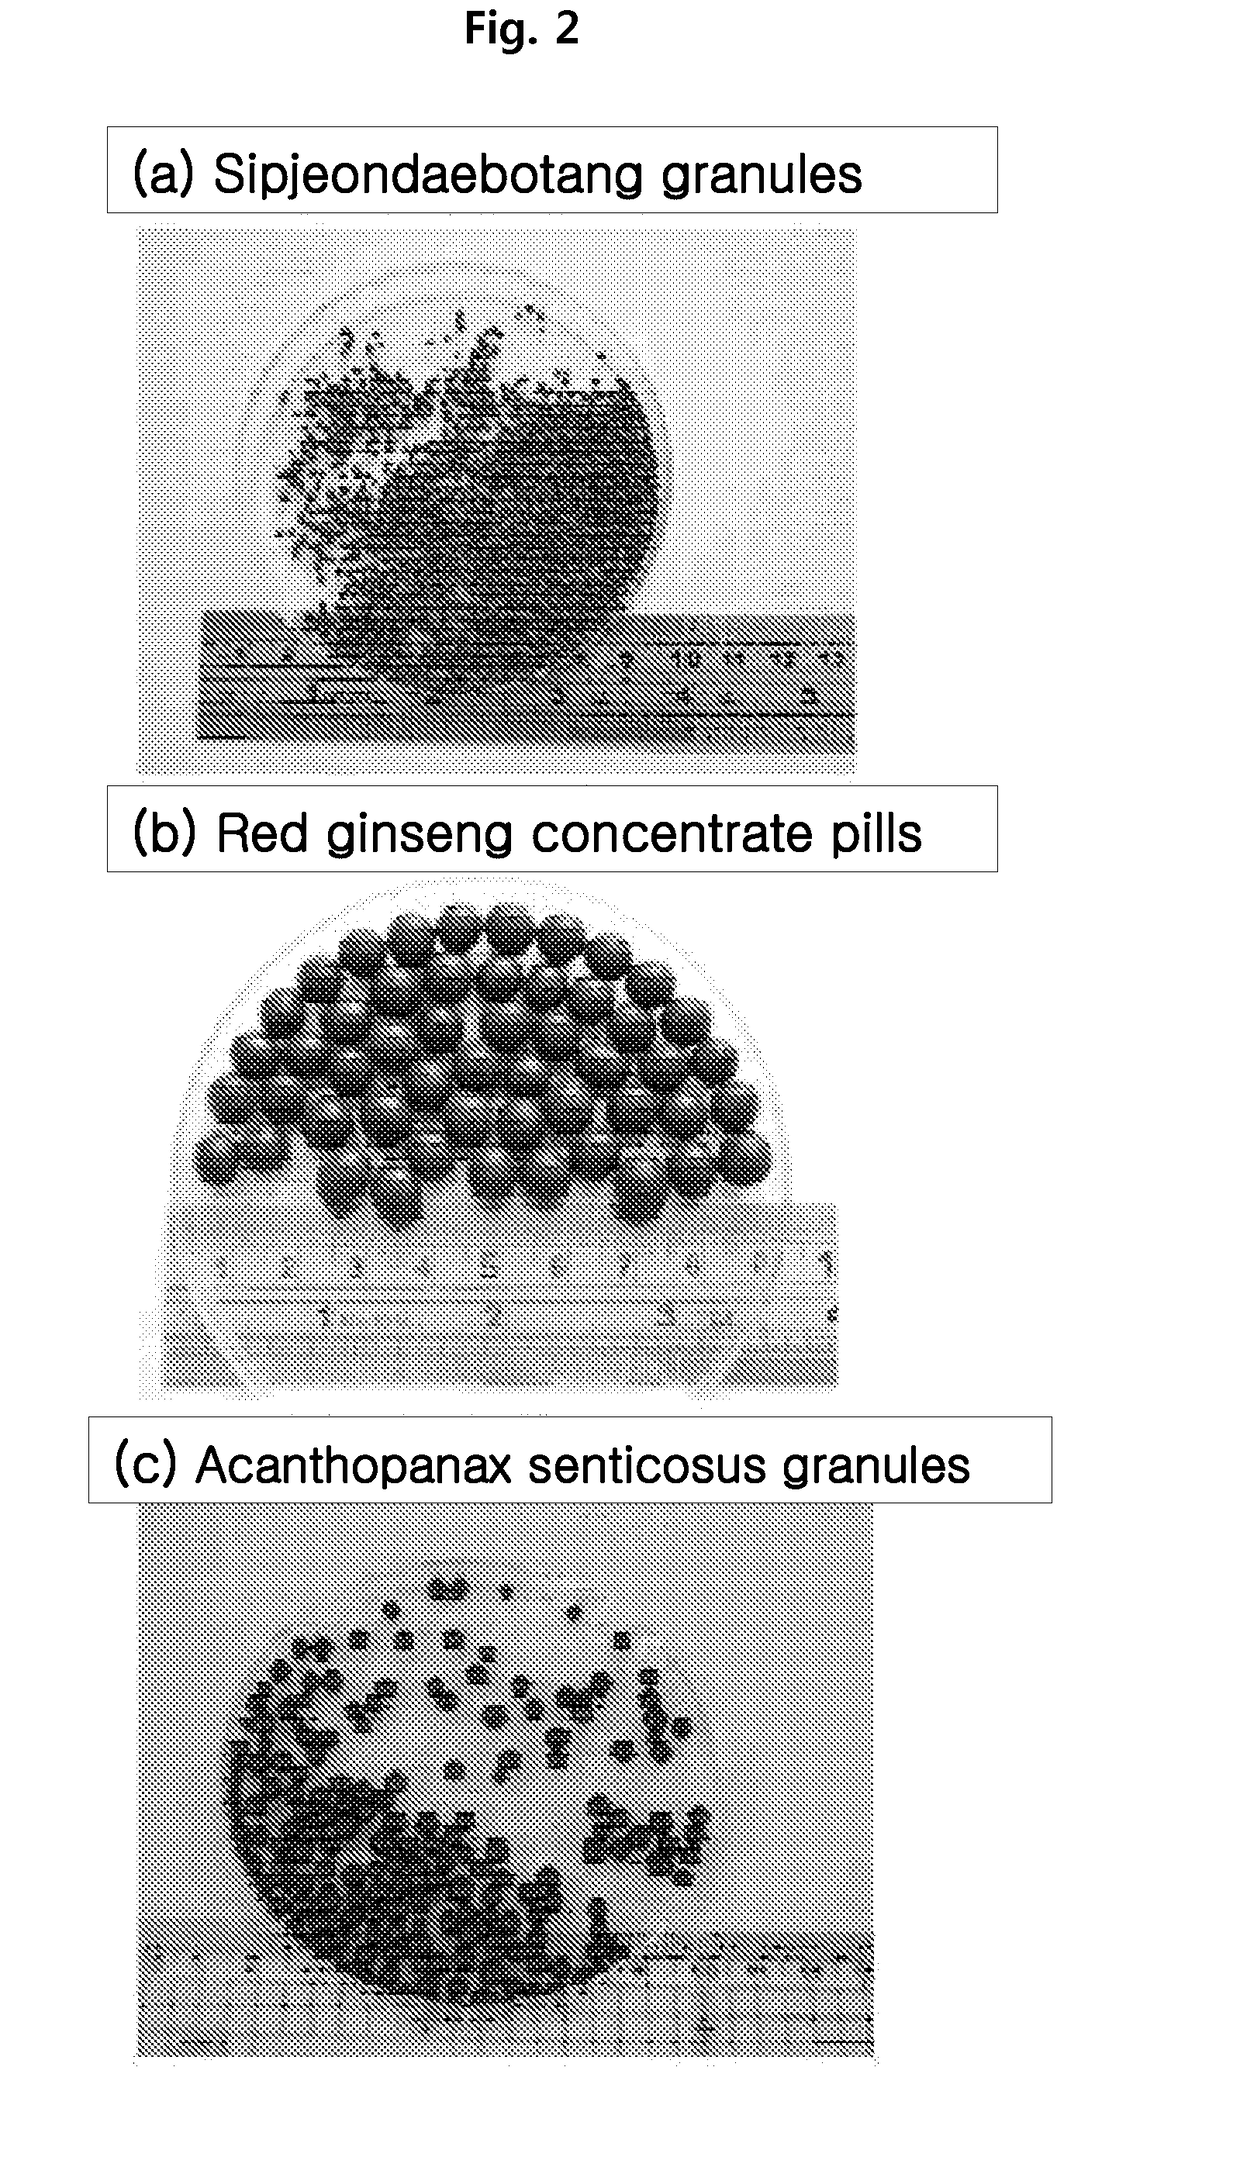 Method for preparing granules or pills containing extracts in high concentration